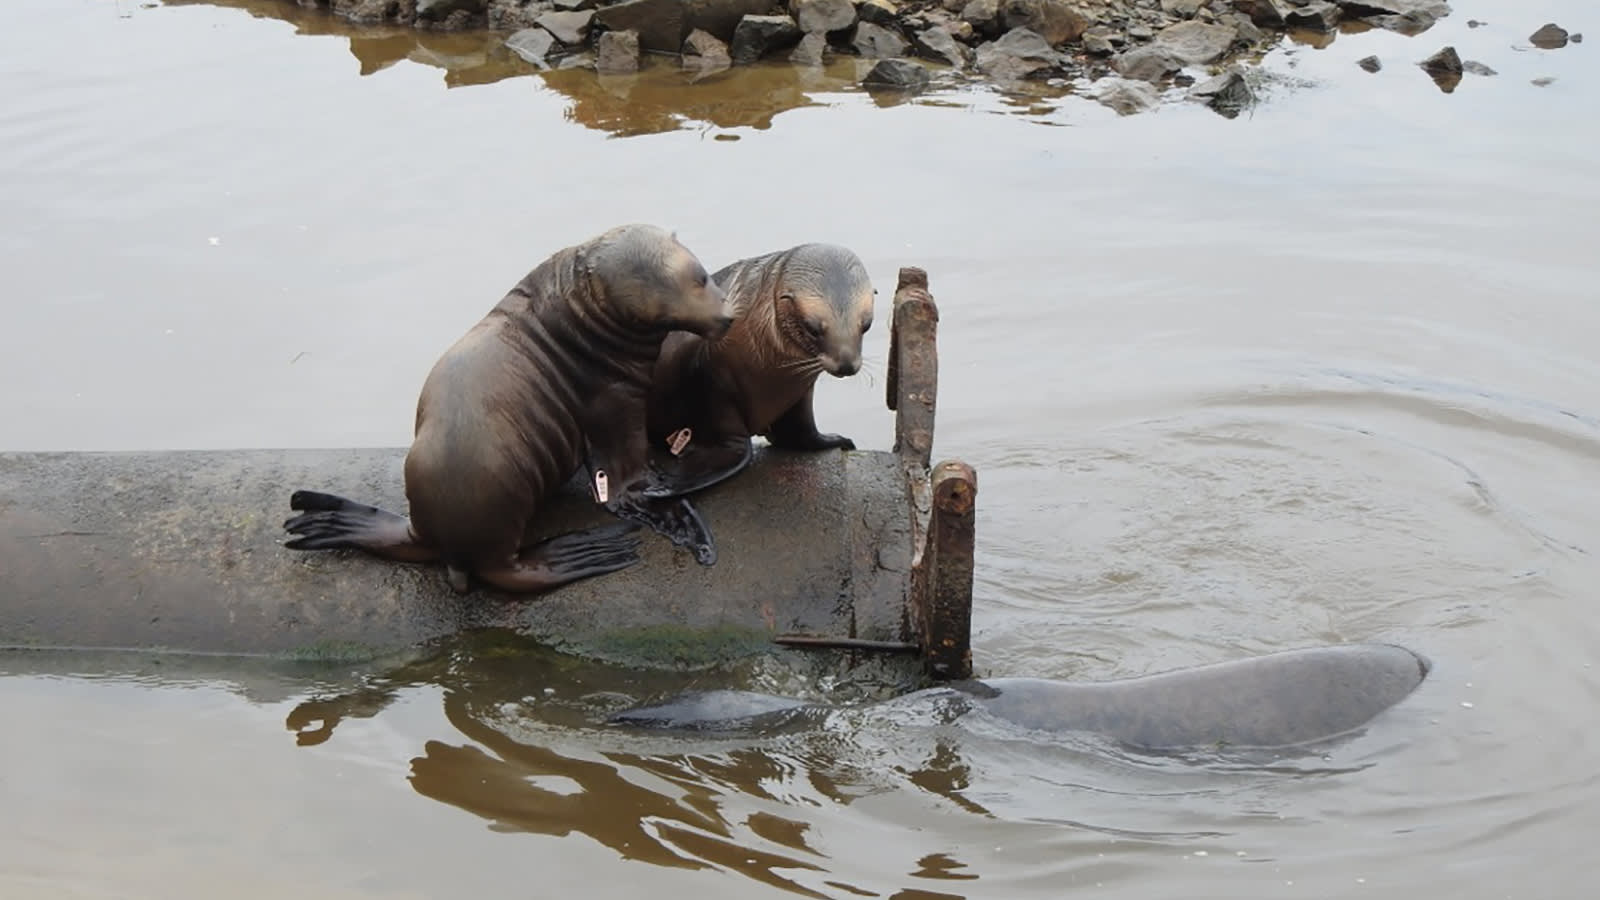 In New Zealand, endangered sea lions have